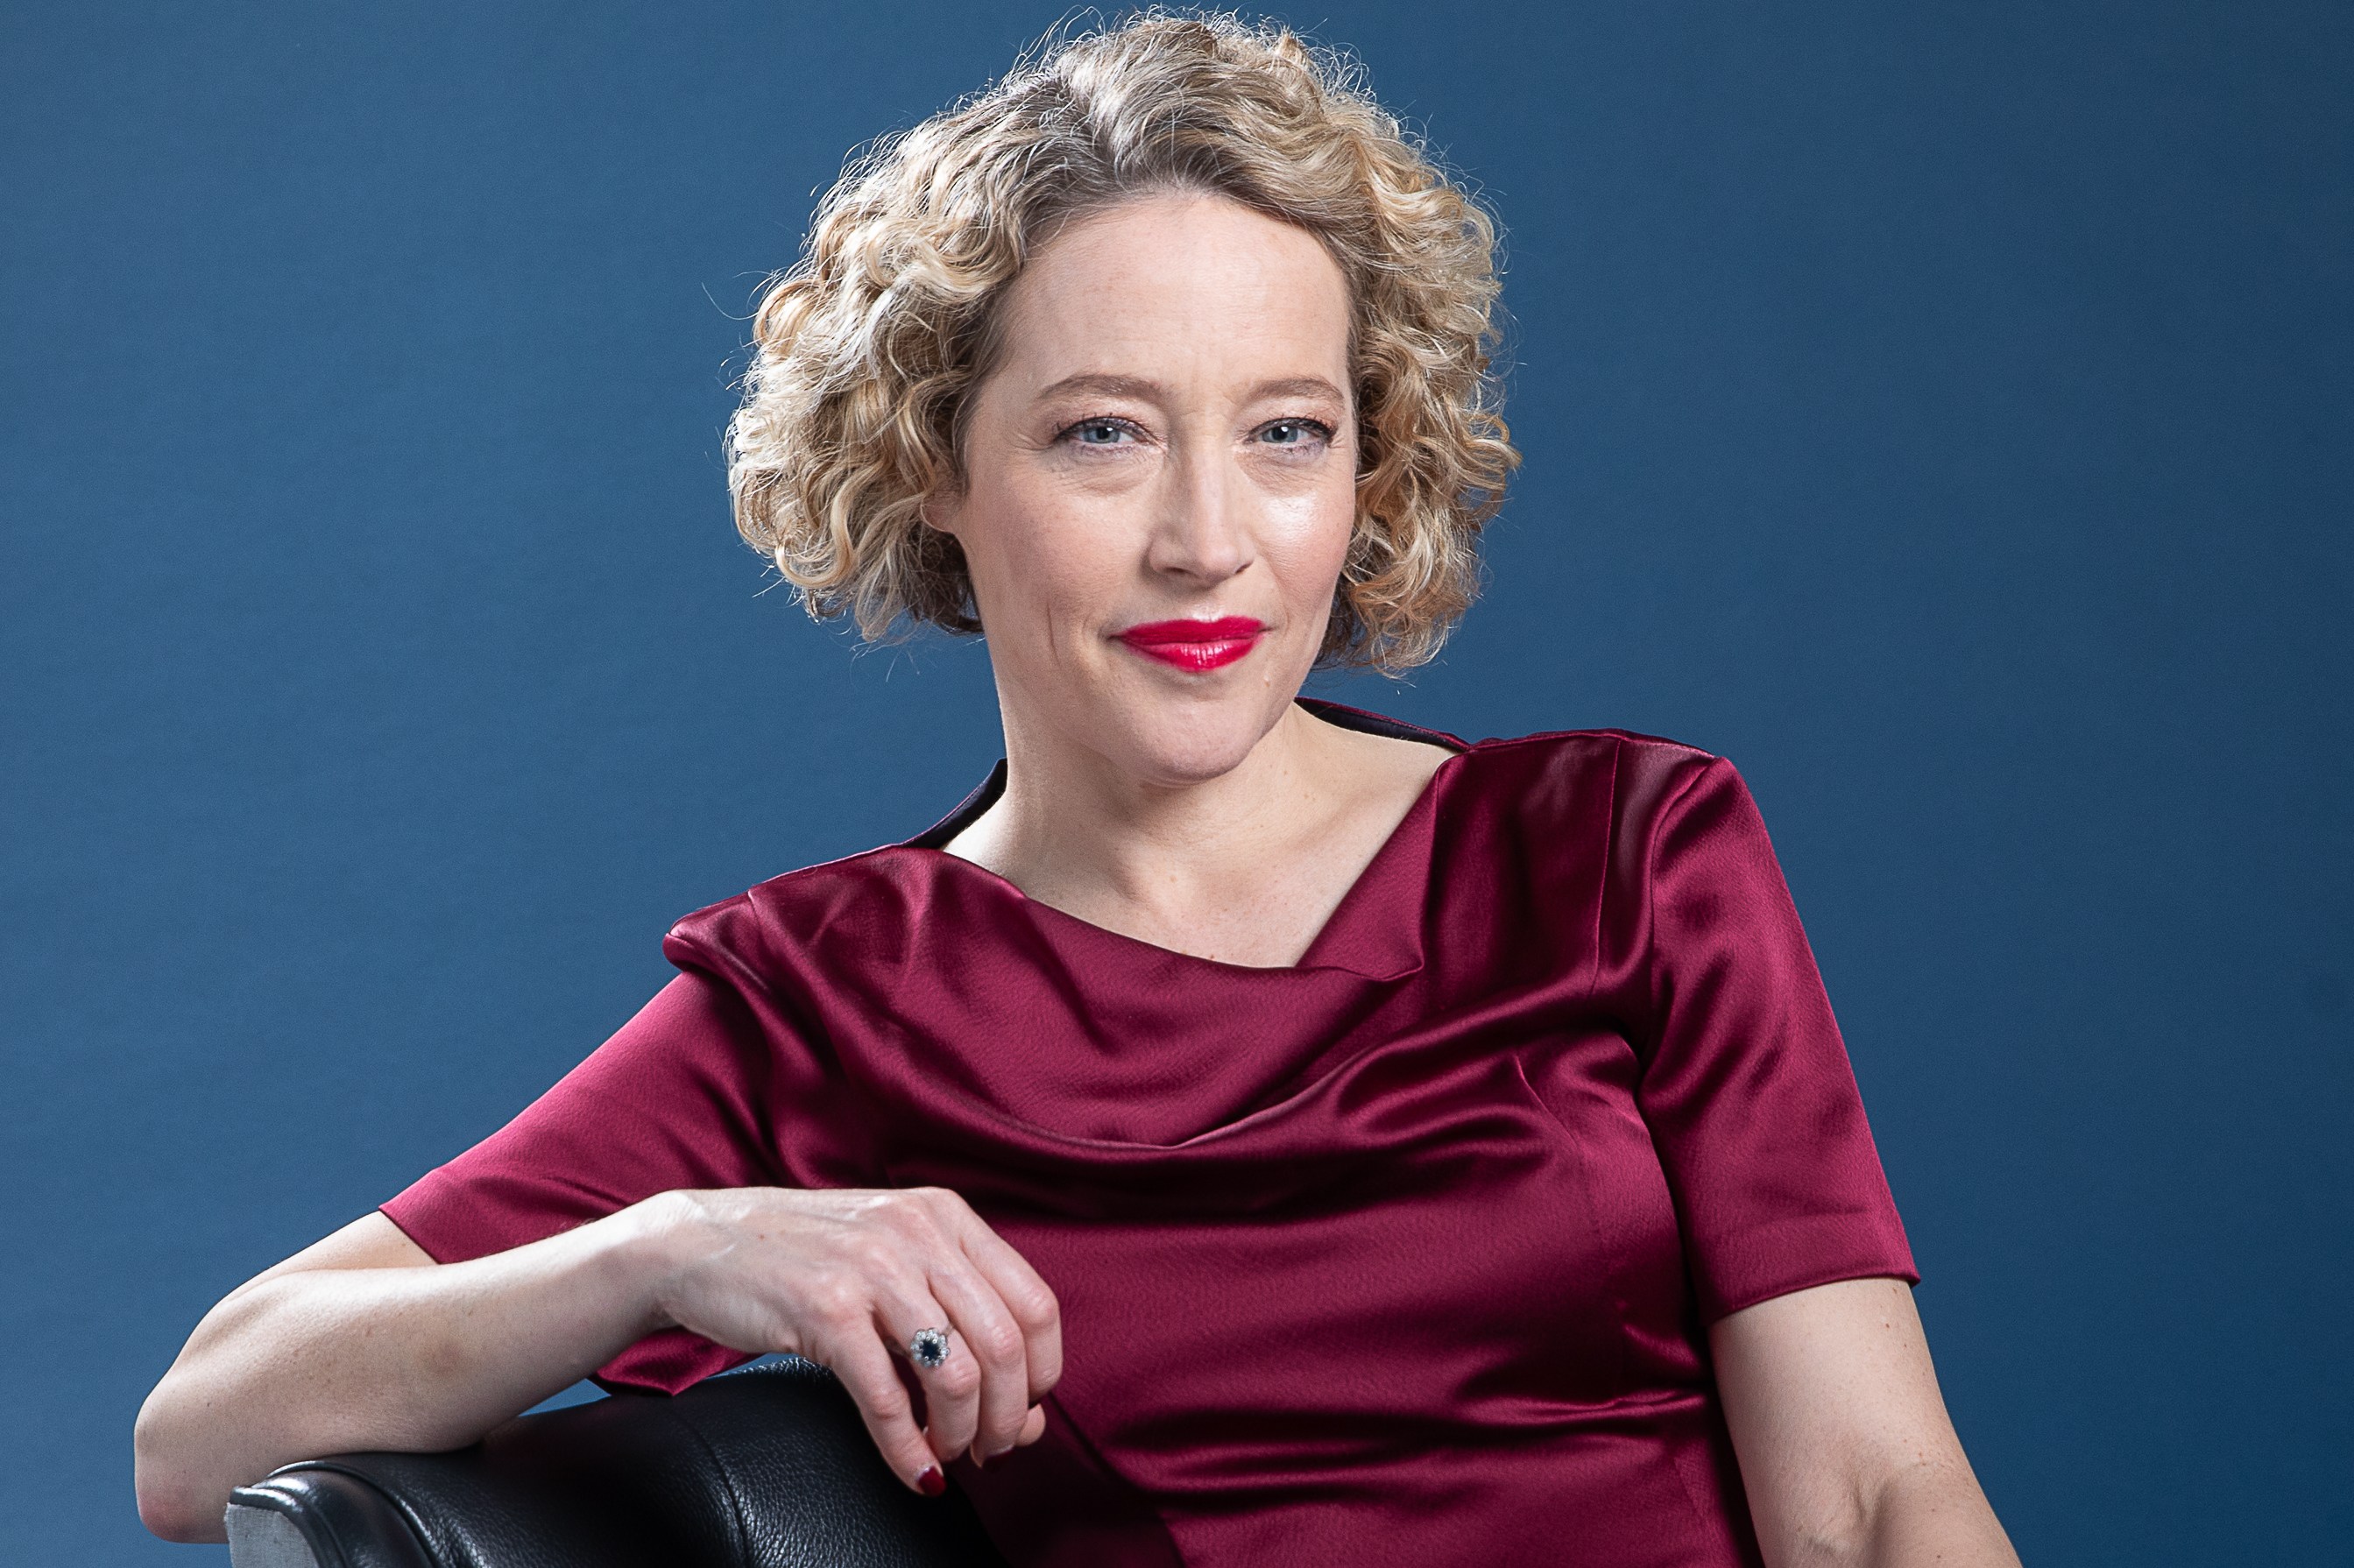 Cathy Newman: “The longer I watched, the more disturbed I became. I felt utterly dehumanised”